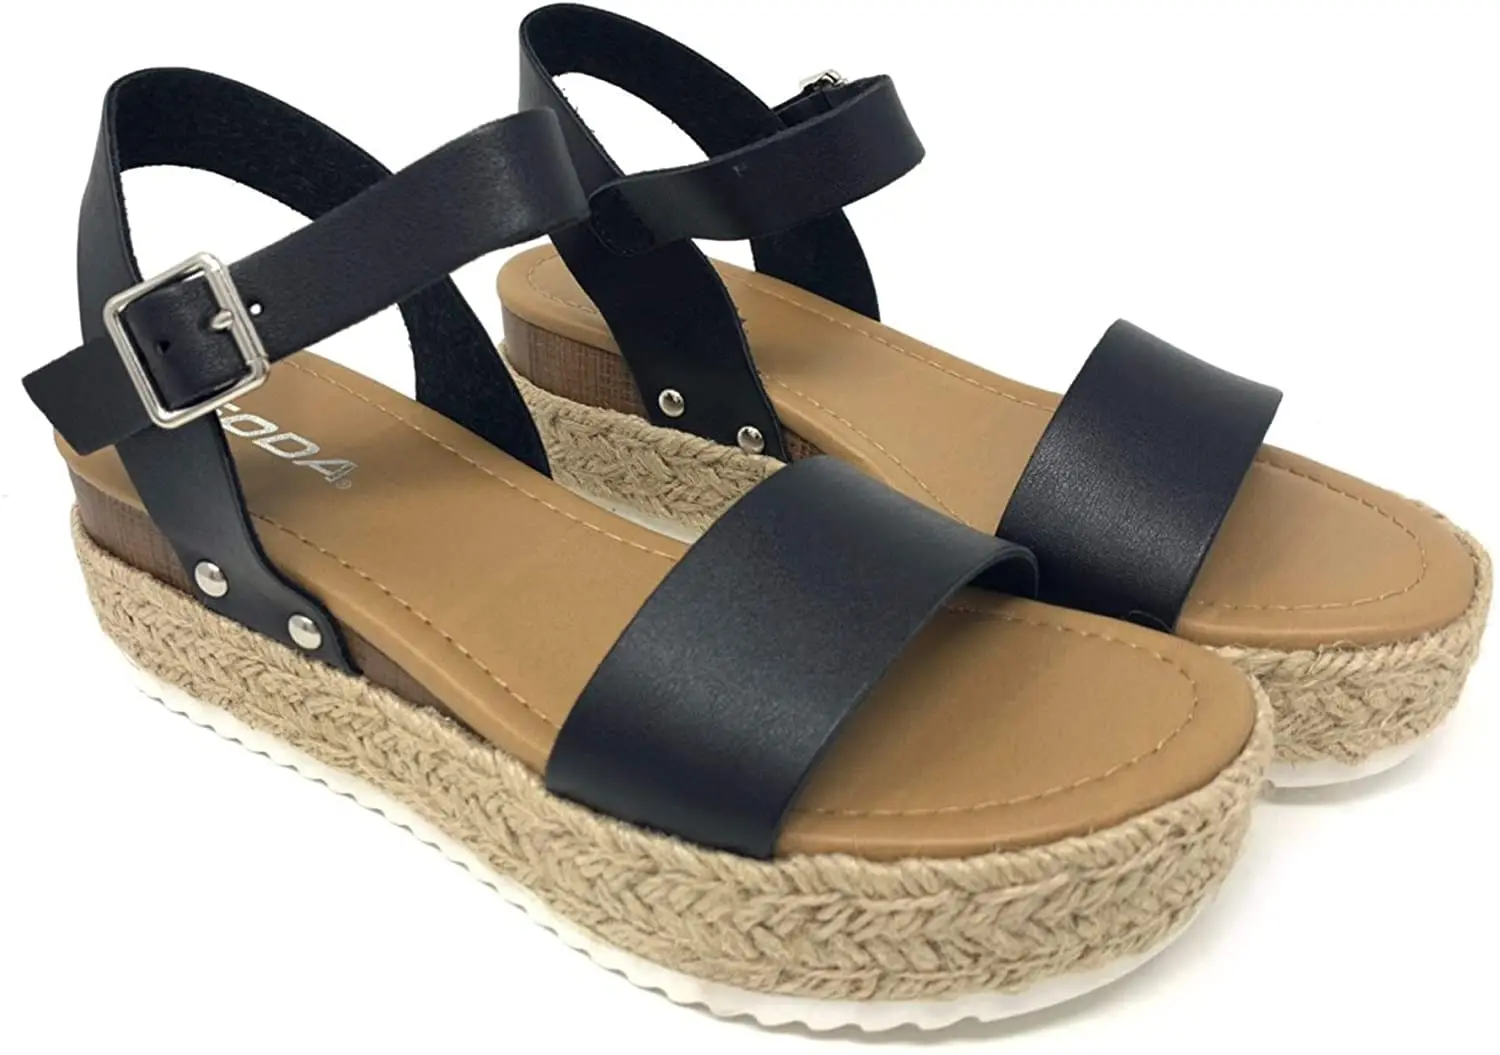 New fancy sexy casual women platform Straw sole summer wedge sandals shoes ladies